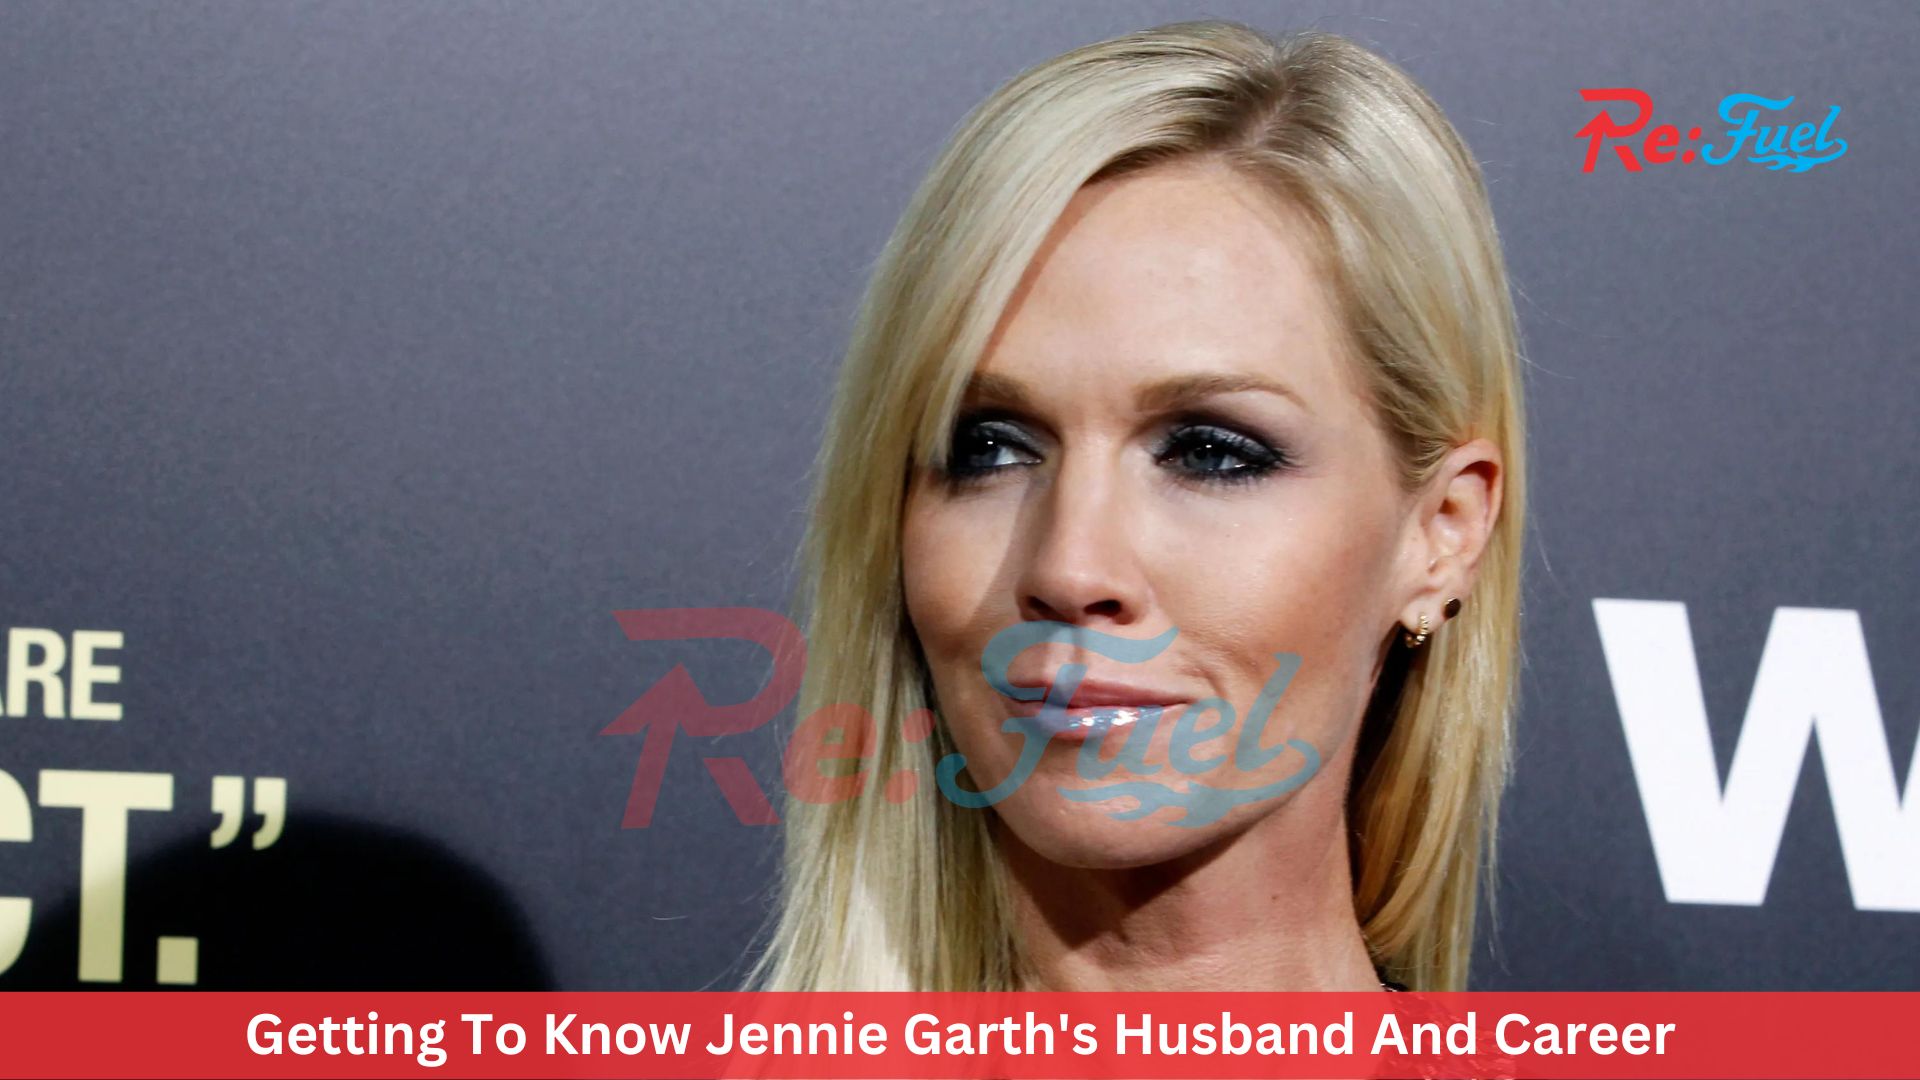 Getting To Know Jennie Garth's Husband And Career